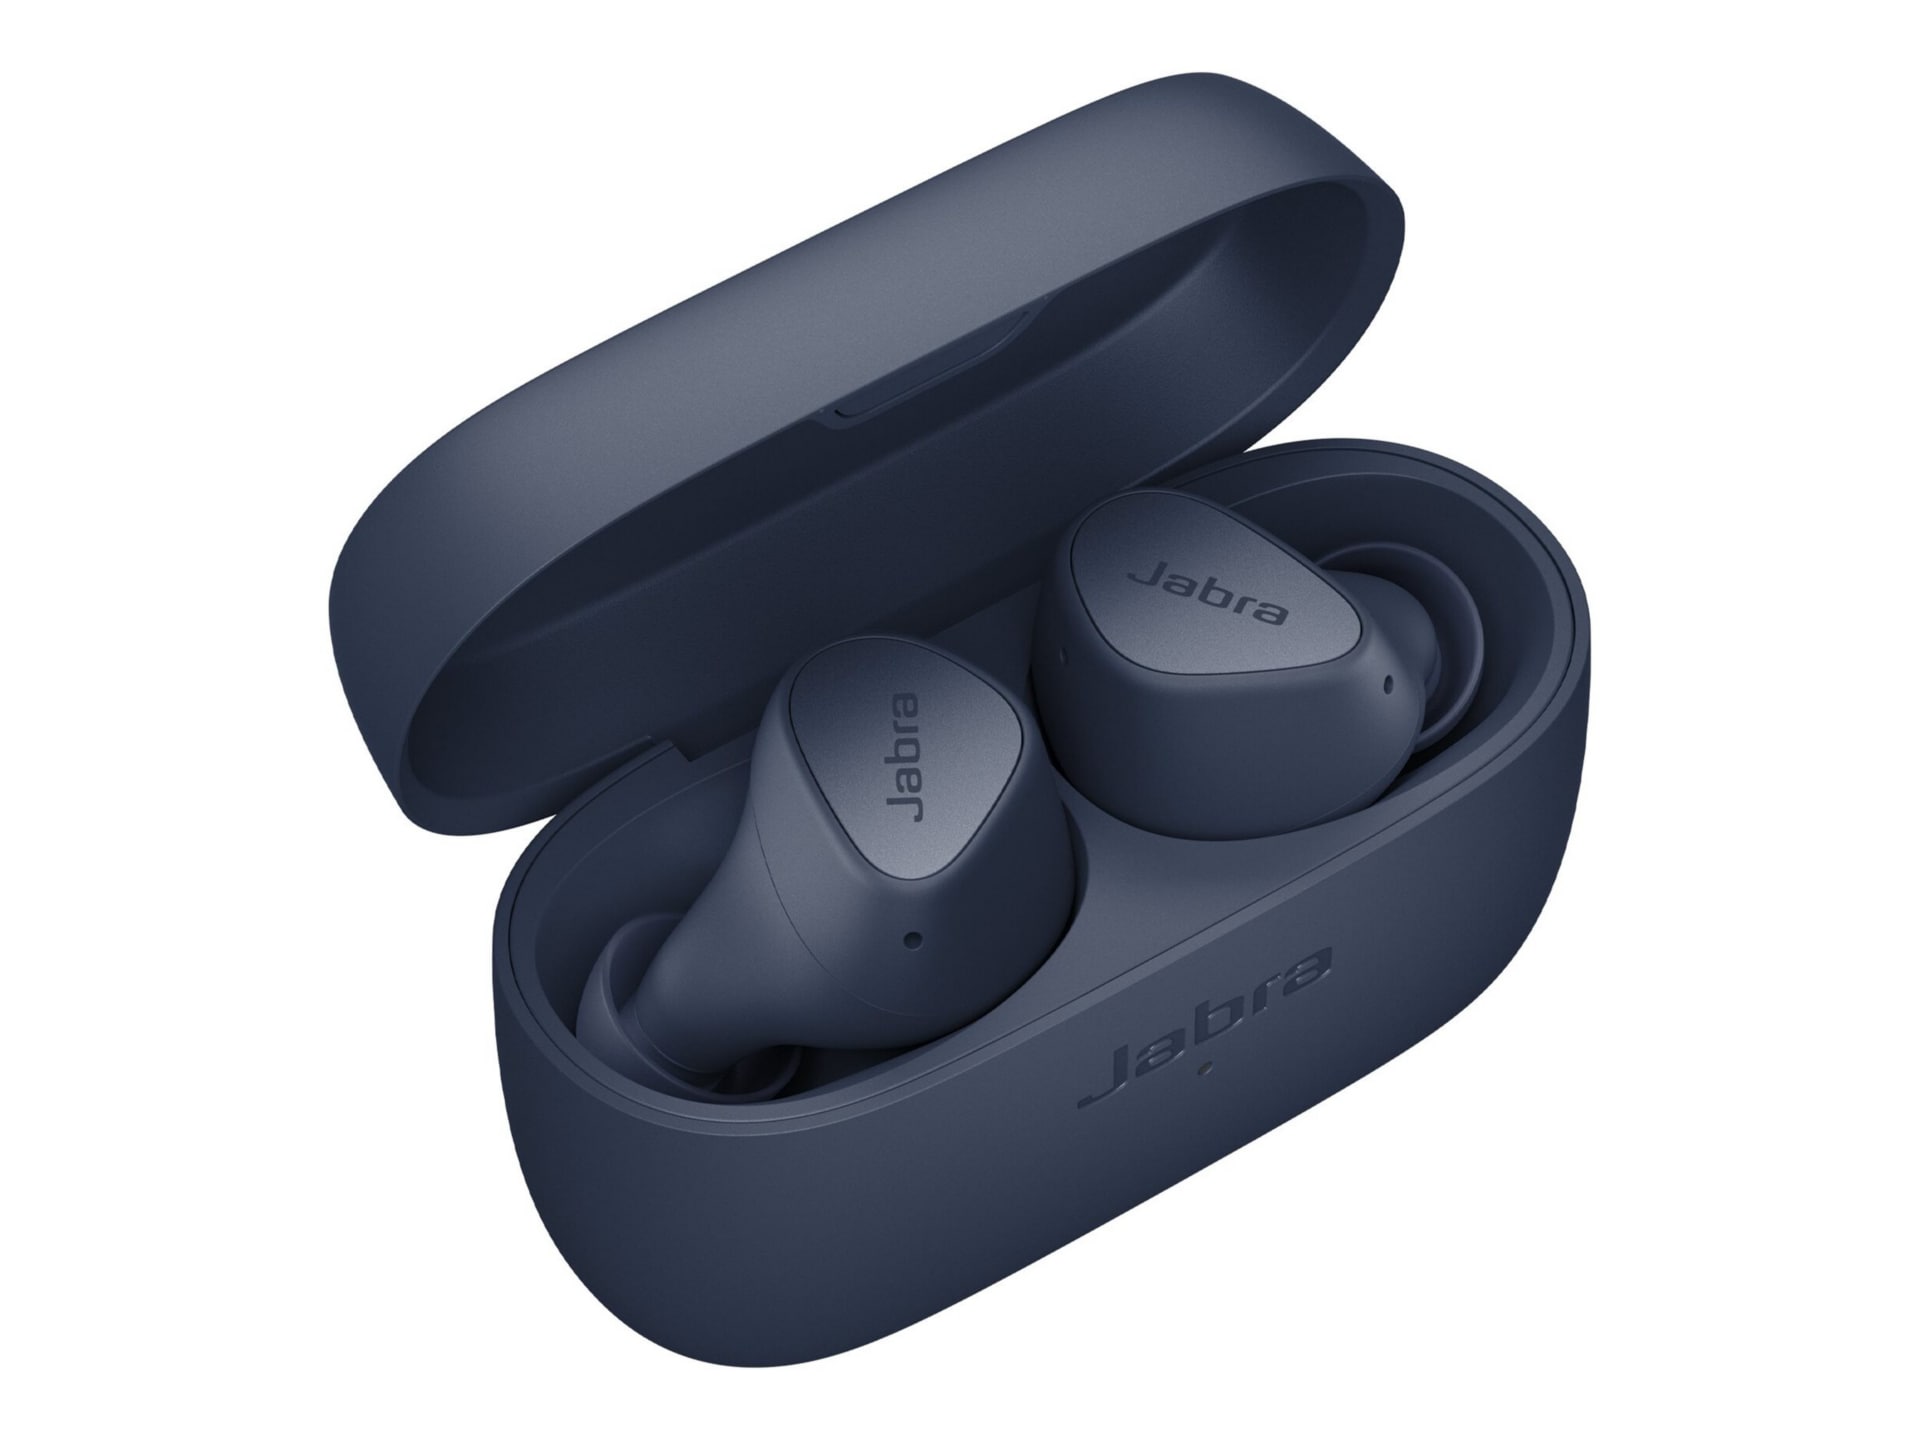 True wireless earbuds with powerful sound & crystal-clear calls